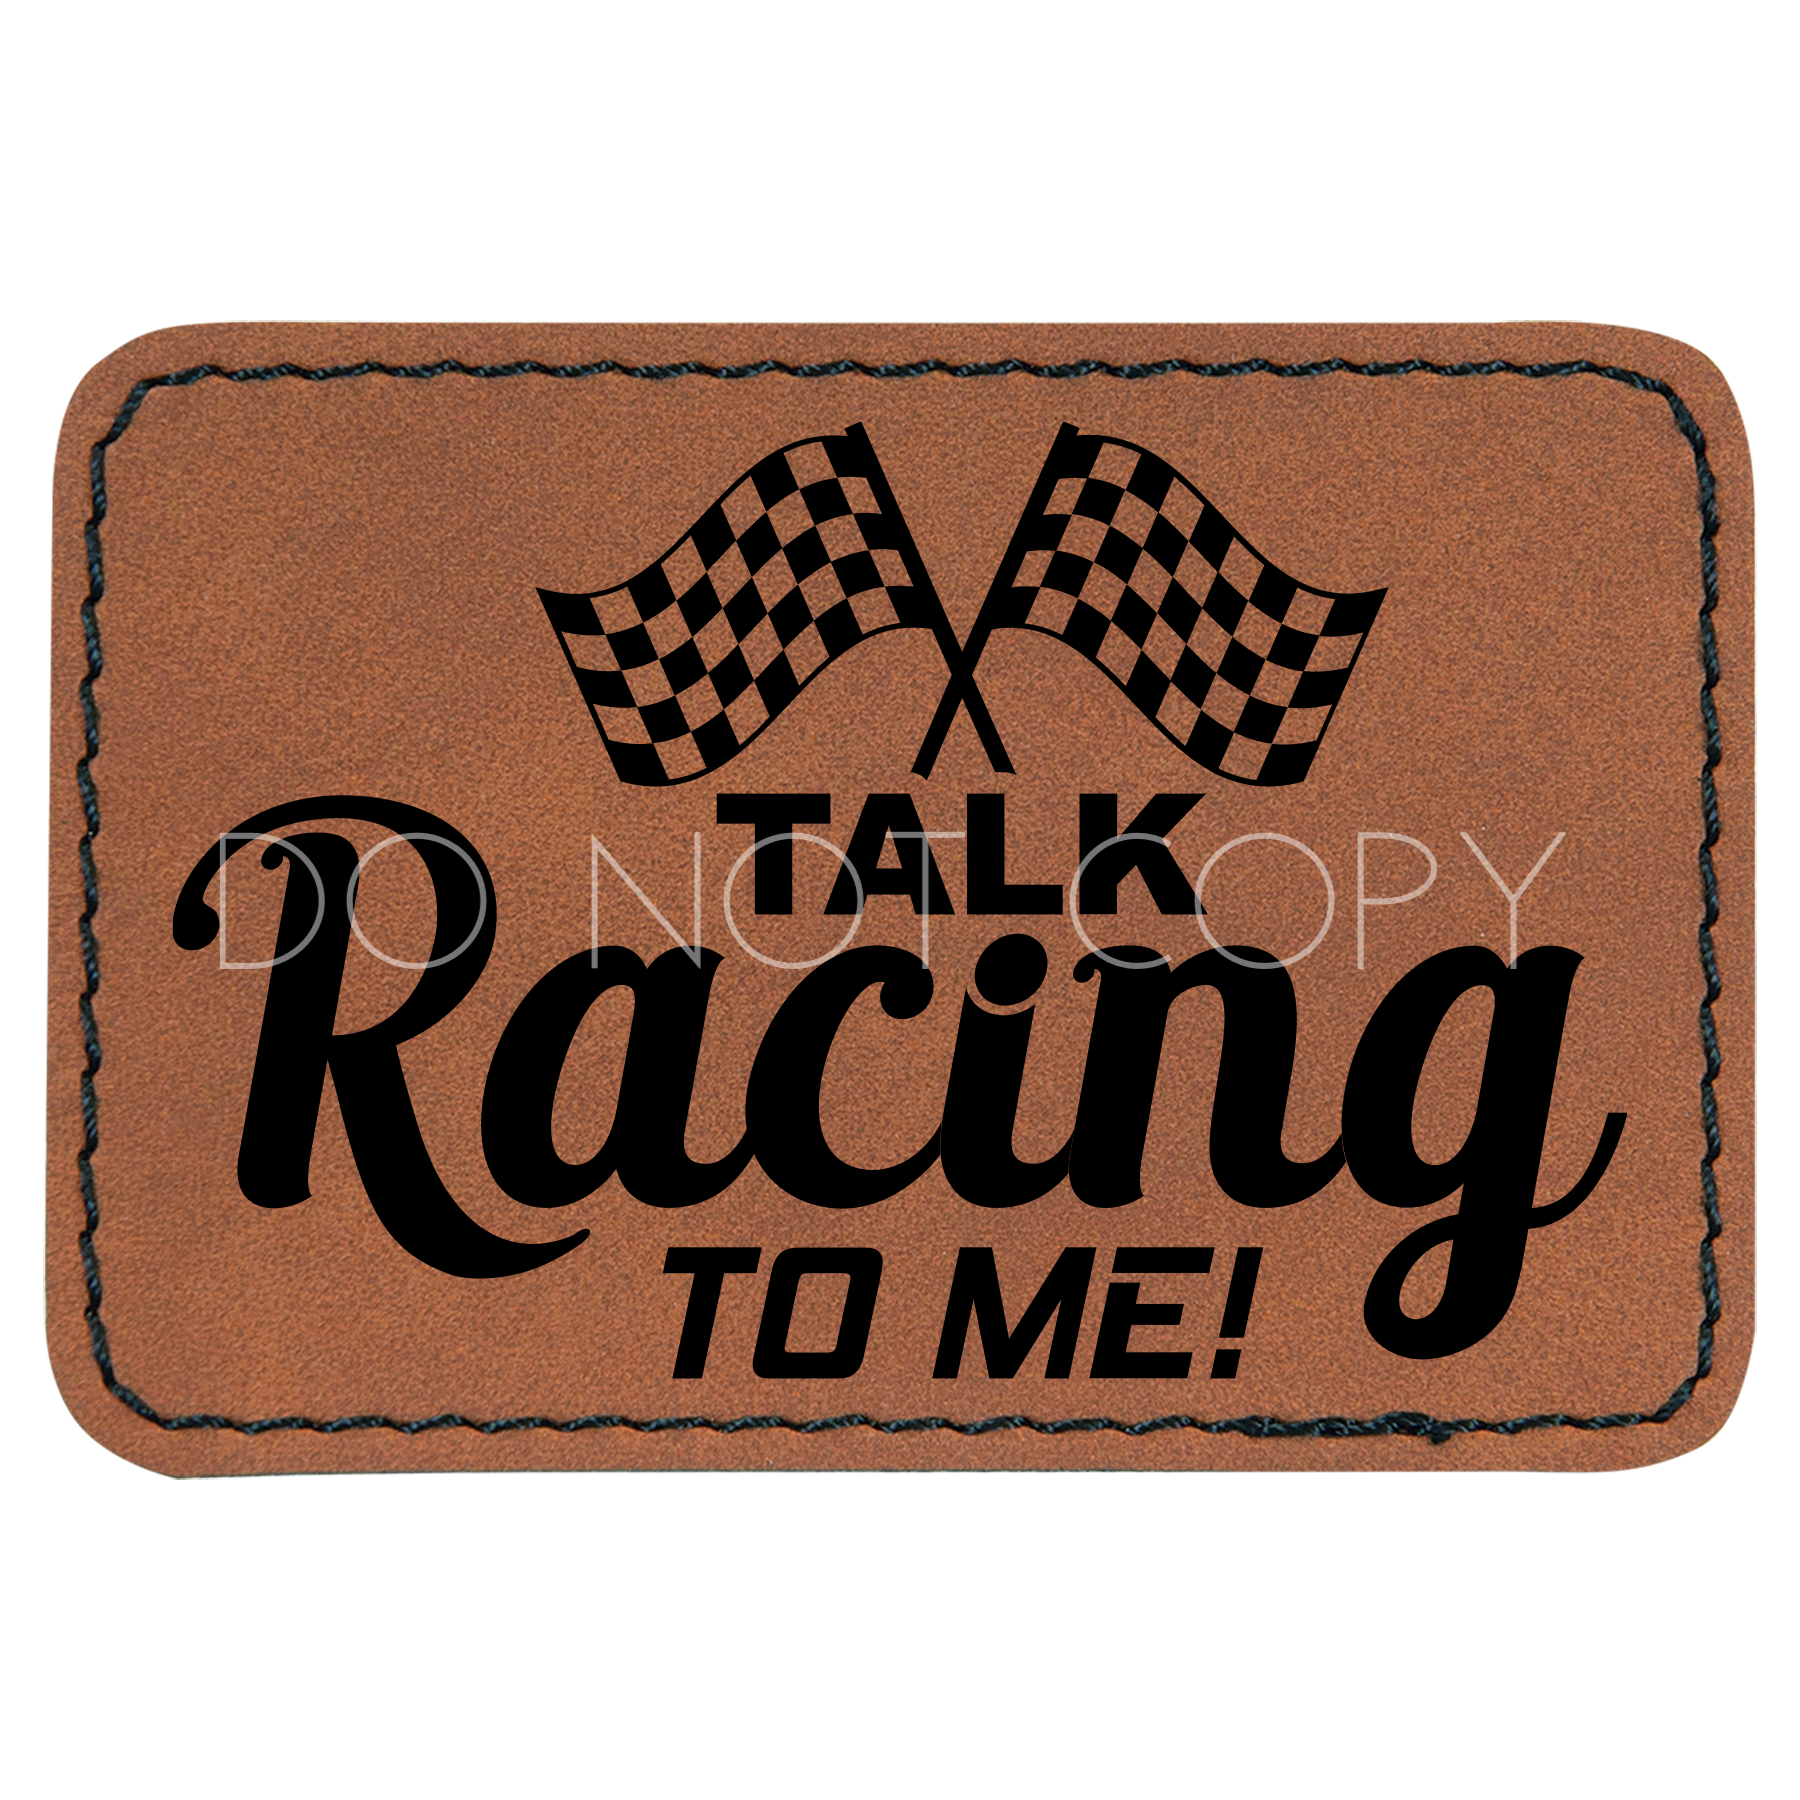 Talk Racing To Me Patch